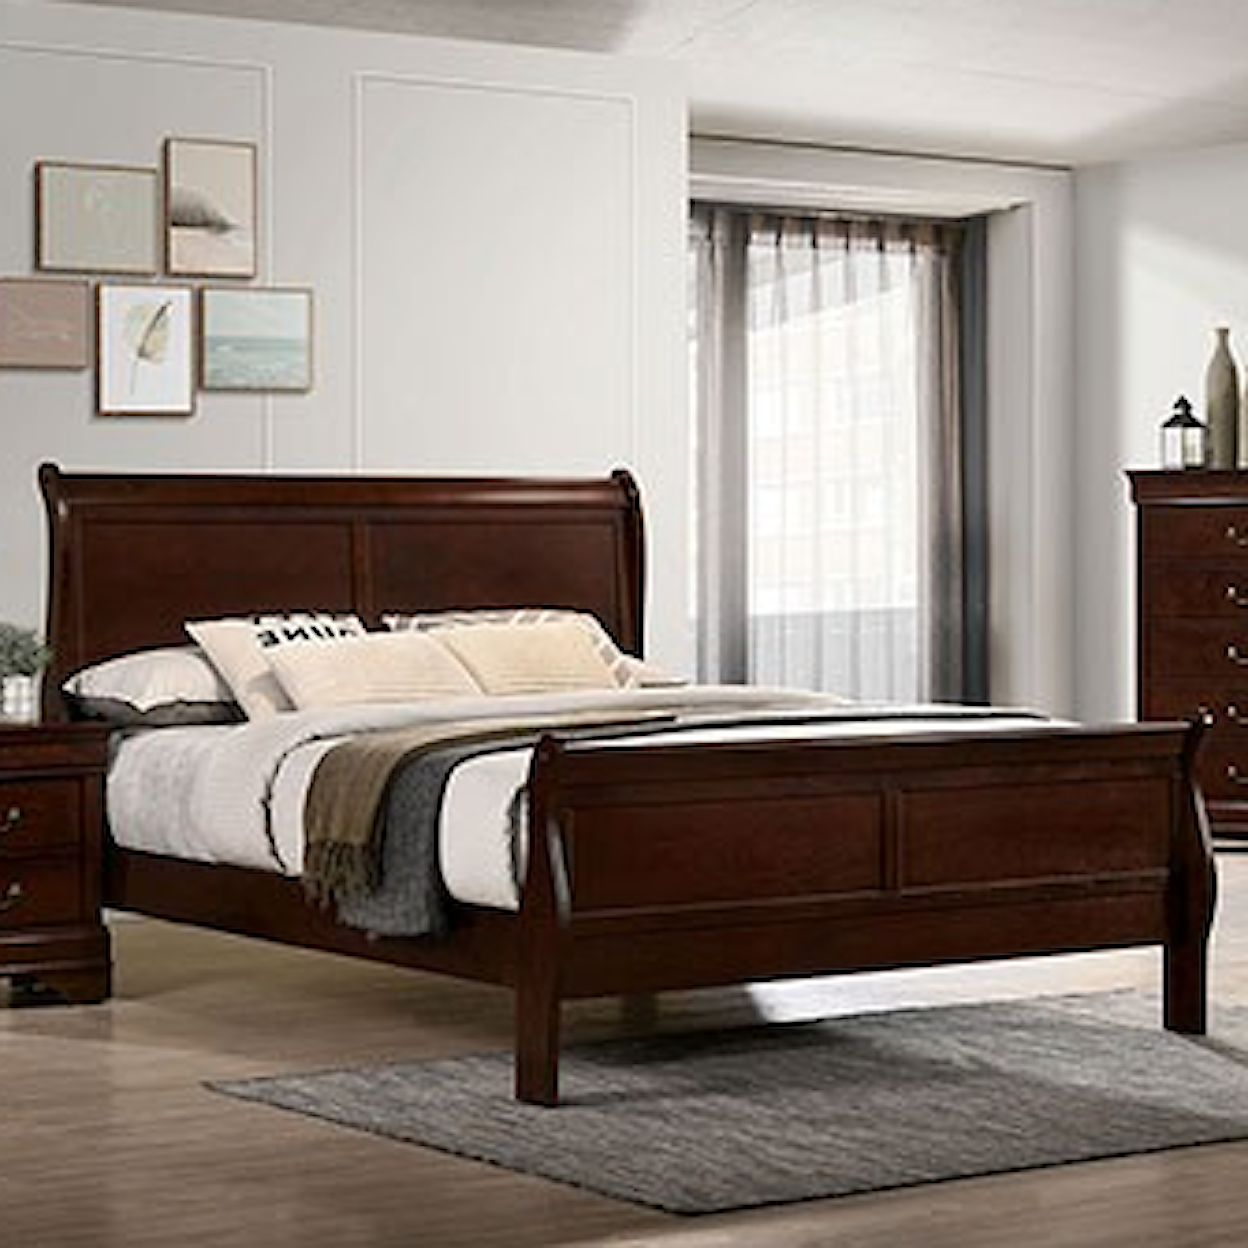 Furniture of America Louis Philippe King Bed, Cherry